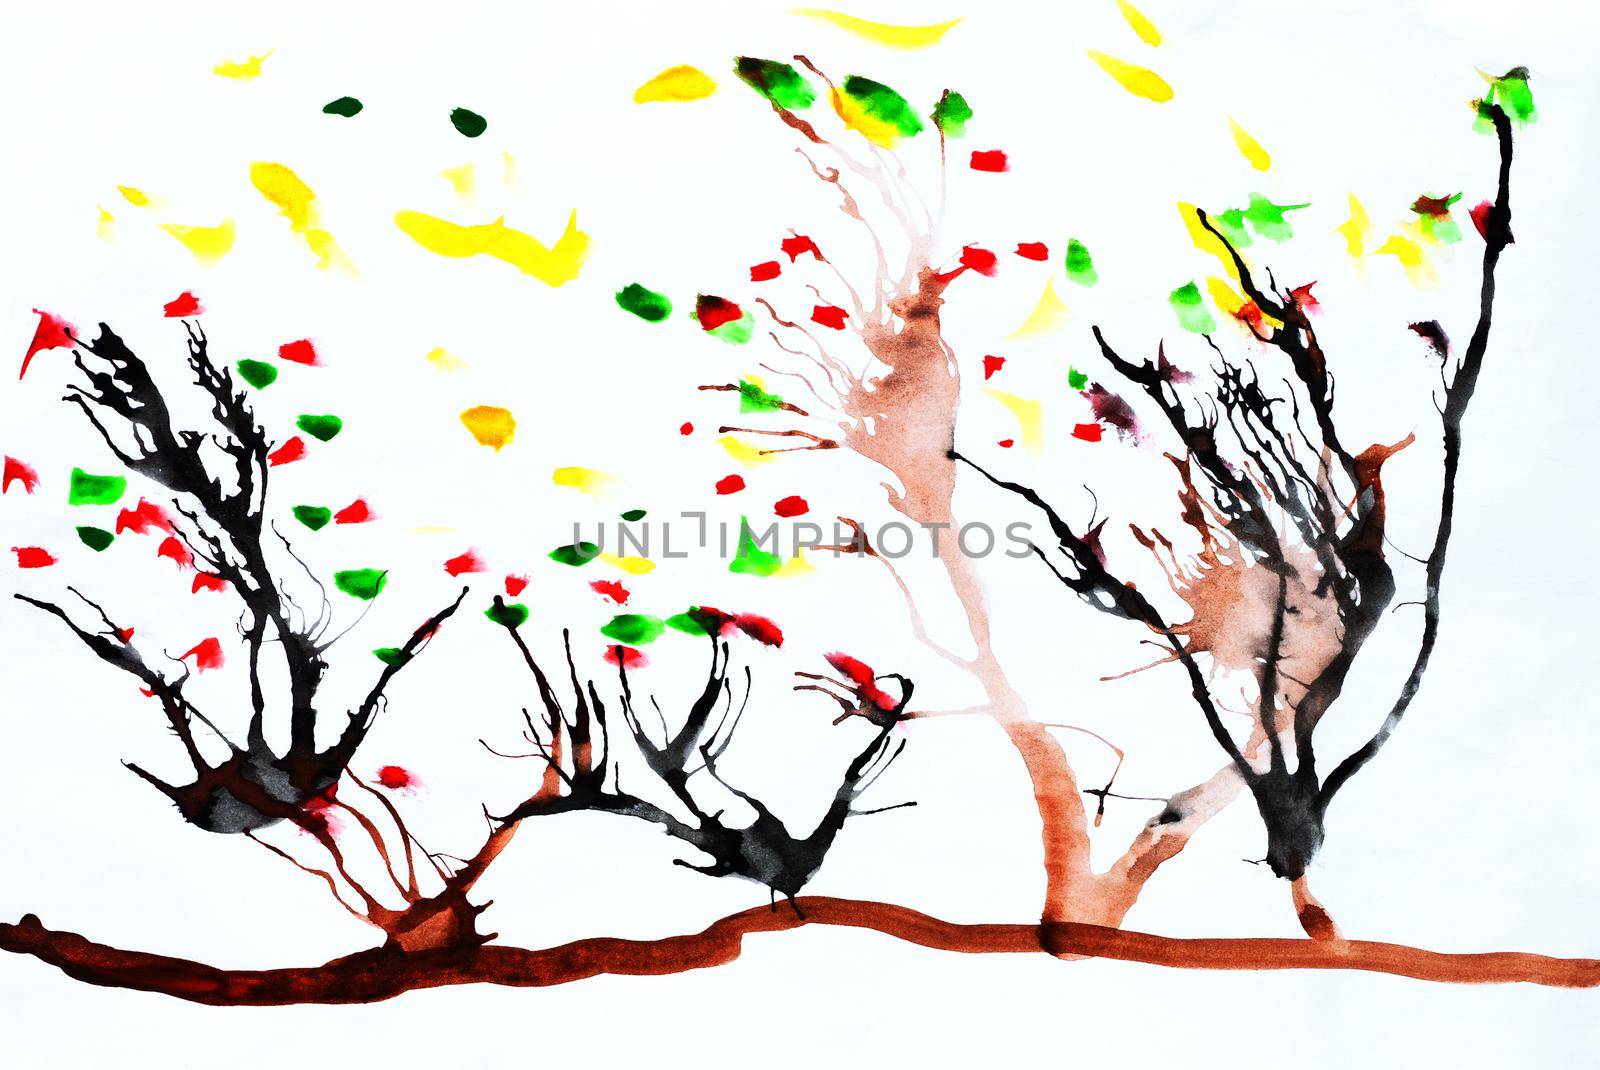 Illustration made by child of trees with swaying branches in wind on white background